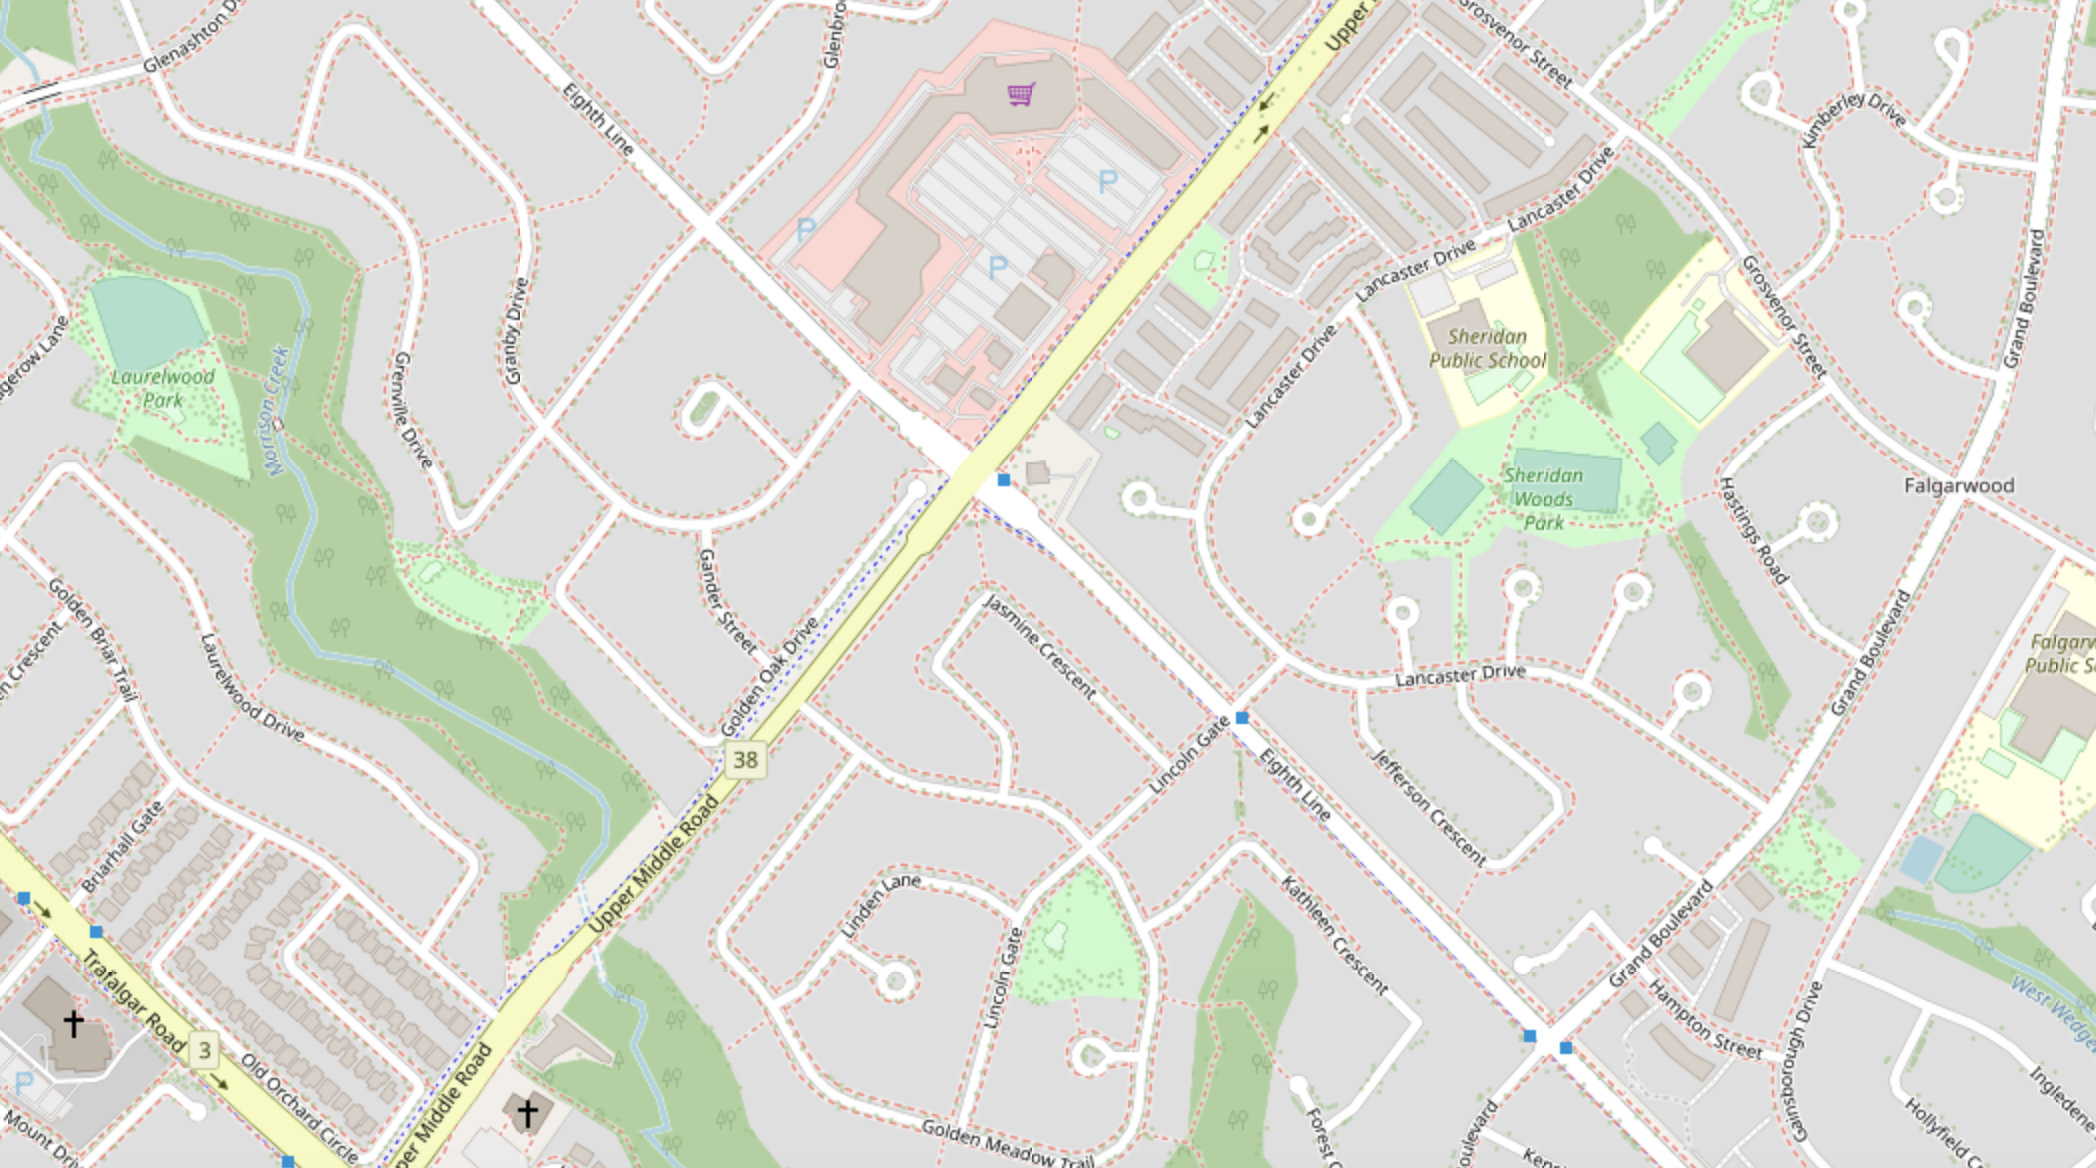 Upper Middle Road East and Eighth Line | Openstreetmap